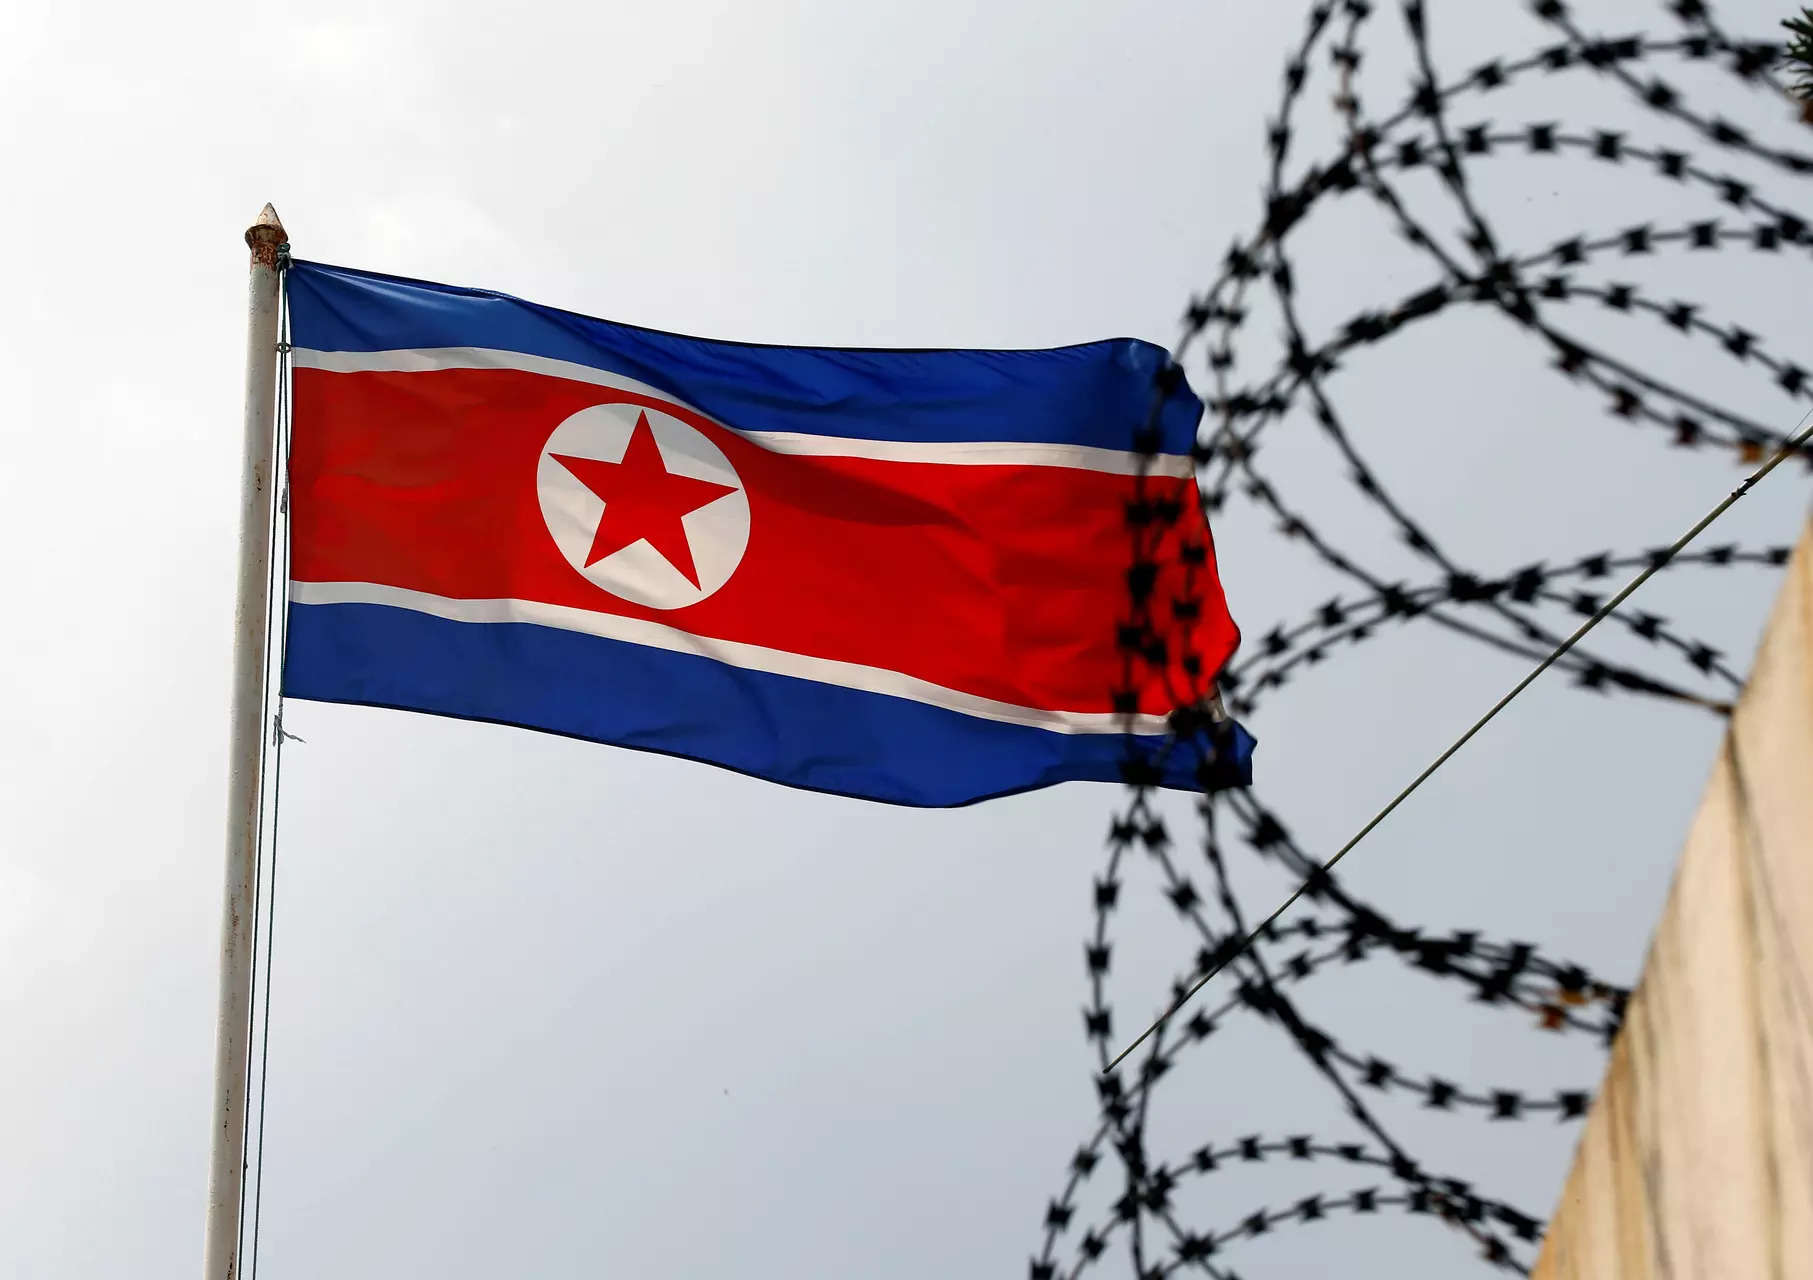 Are public executions on the rise in North Korea? The Hermit Kingdom seeks to curb cultural influence from South Korea 